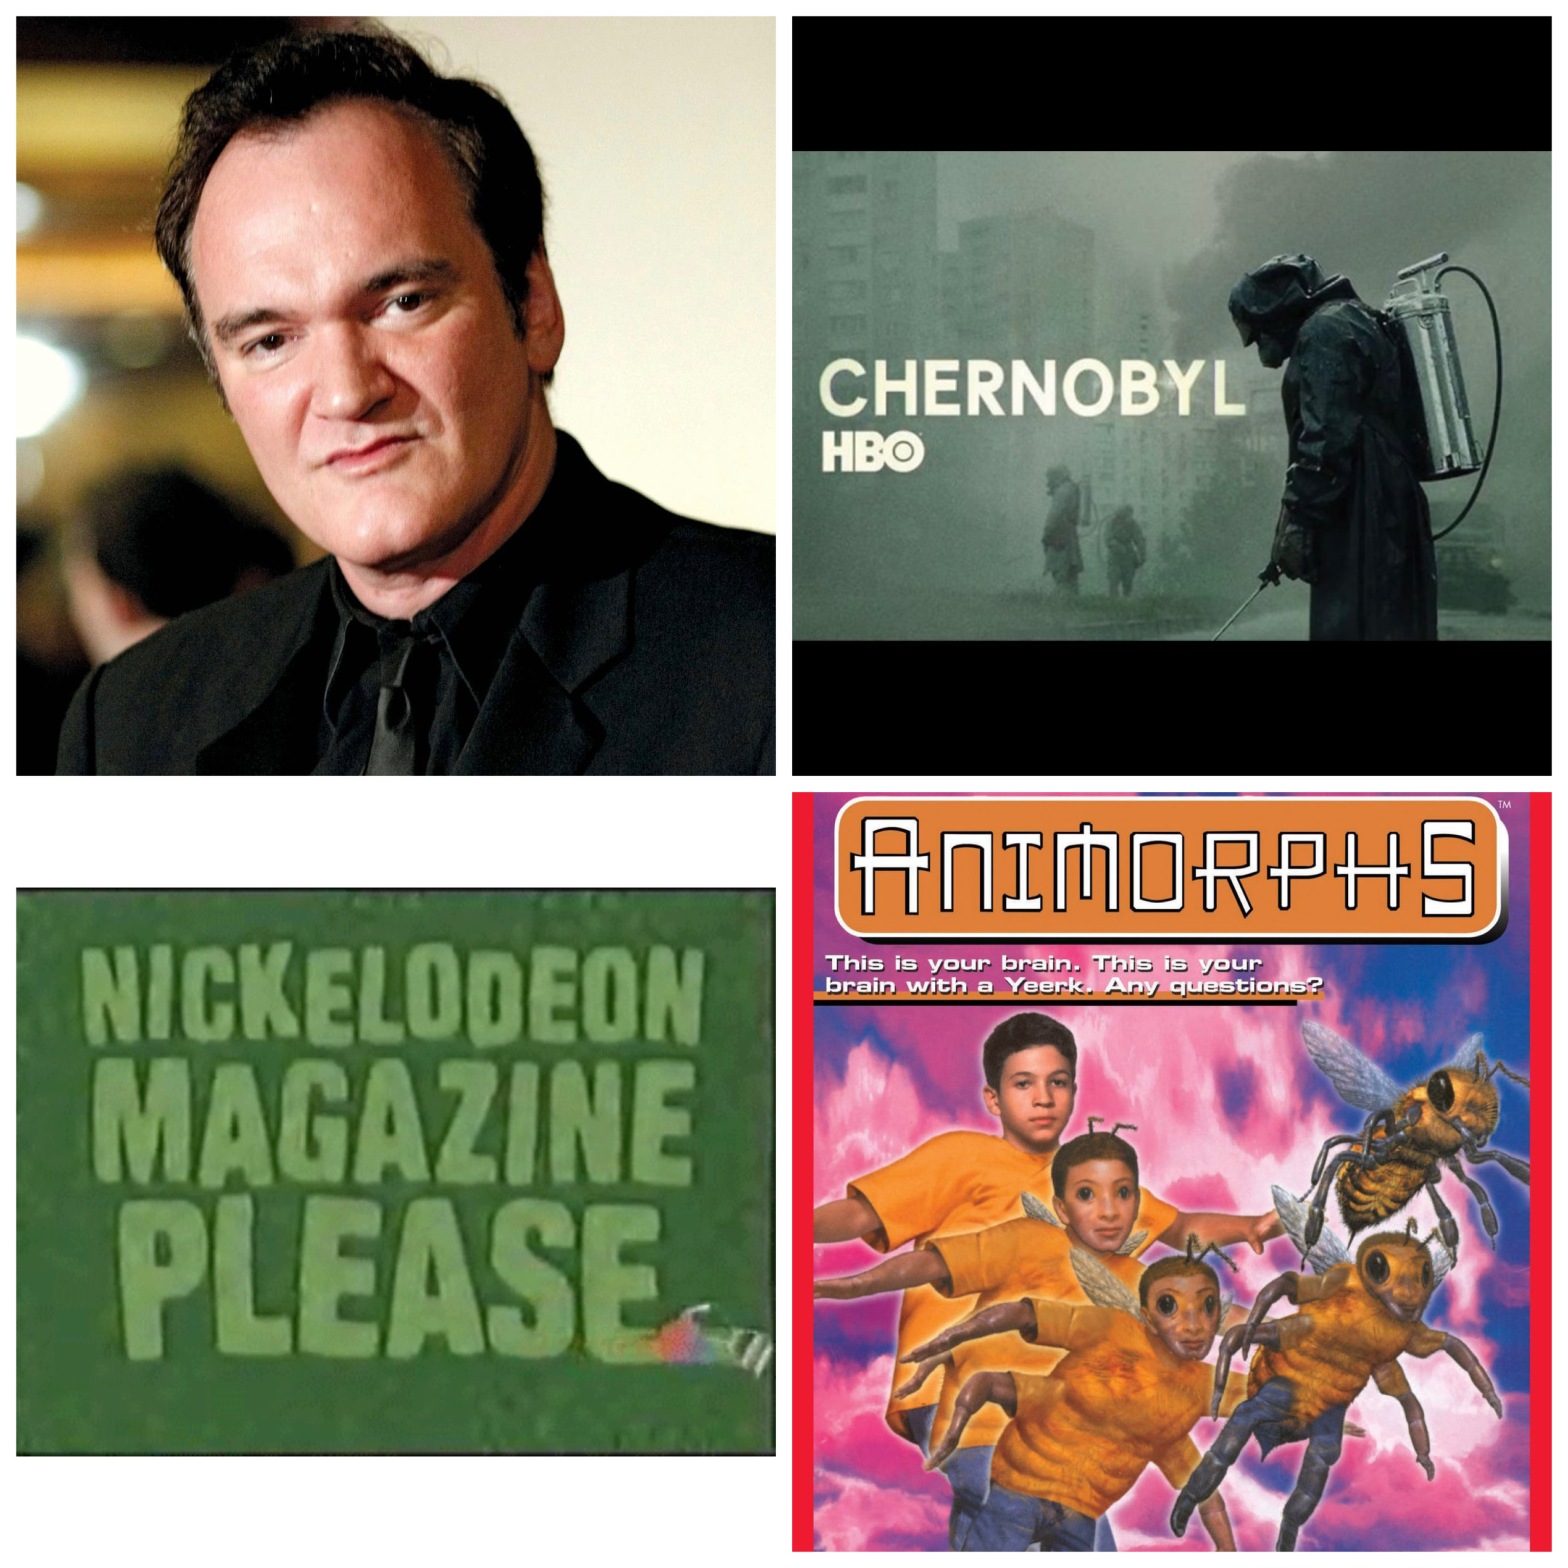 Quentin Tarantino, HBO's Chernobyl, the Nickelodeon Magazine commercial, and an Animorphs book.